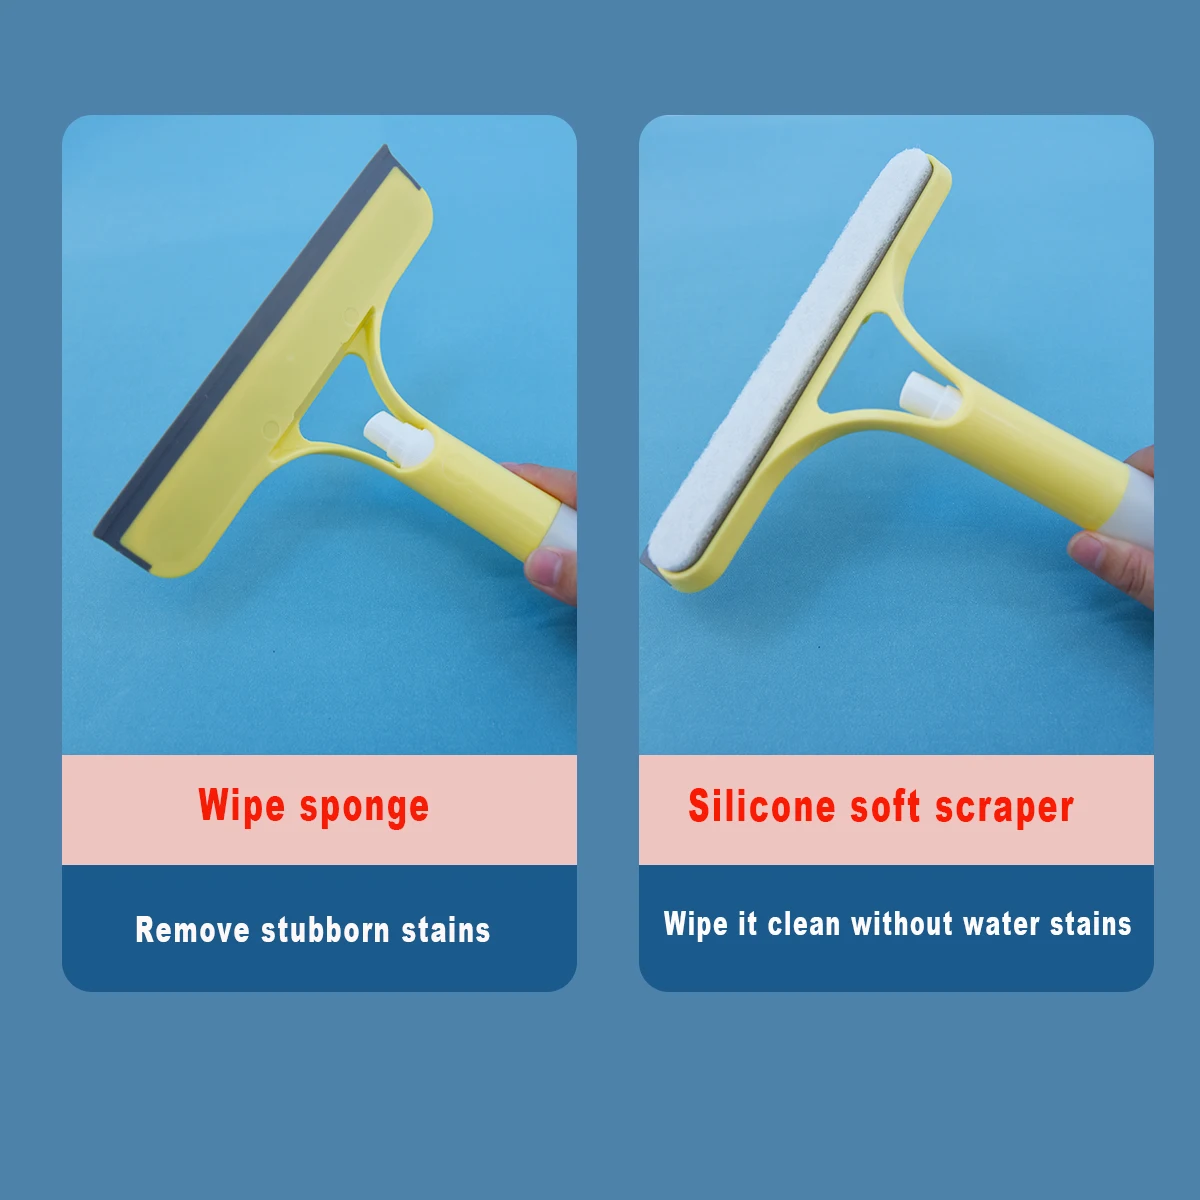 Water Wiper Silica Gel dewatering Car Board Silicone cars Window Wash Clean  Cleaner Squeegee Drying Cleanning accessories tool - AliExpress